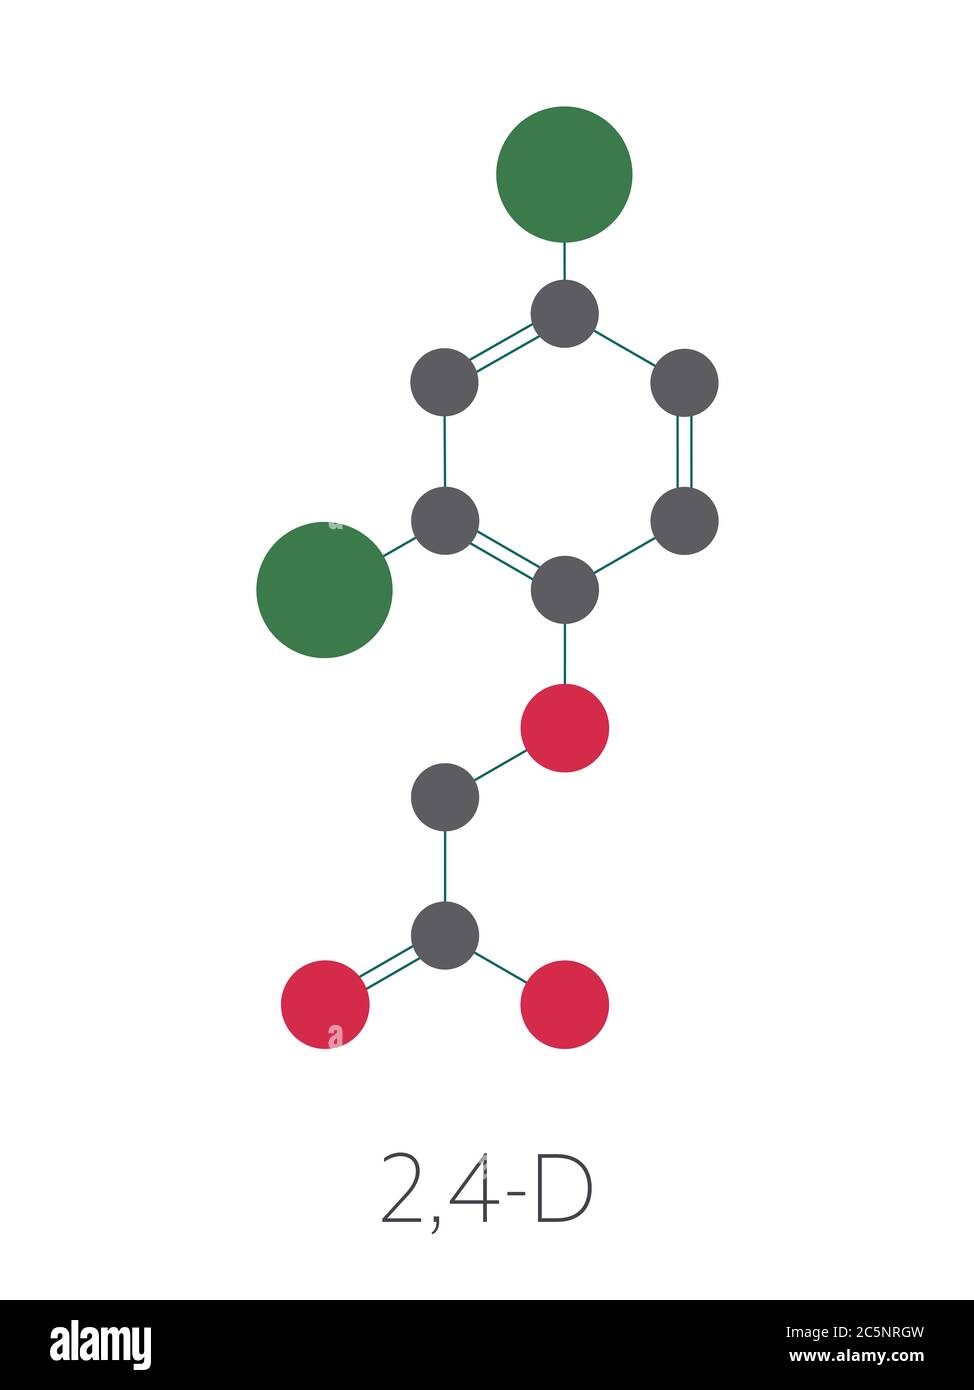 2,4-D (2,4-dichlorophenoxyacetic acid) Agent Orange ingredient. Synthetic auxin plant hormone, used as pesticide and herbicide and ingredient of Agent Orange. Stylized skeletal formula (chemical structure): Atoms are shown as color-coded circles: hydrogen (hidden), carbon (grey), oxygen (red), chlorine (green). Stock Photo